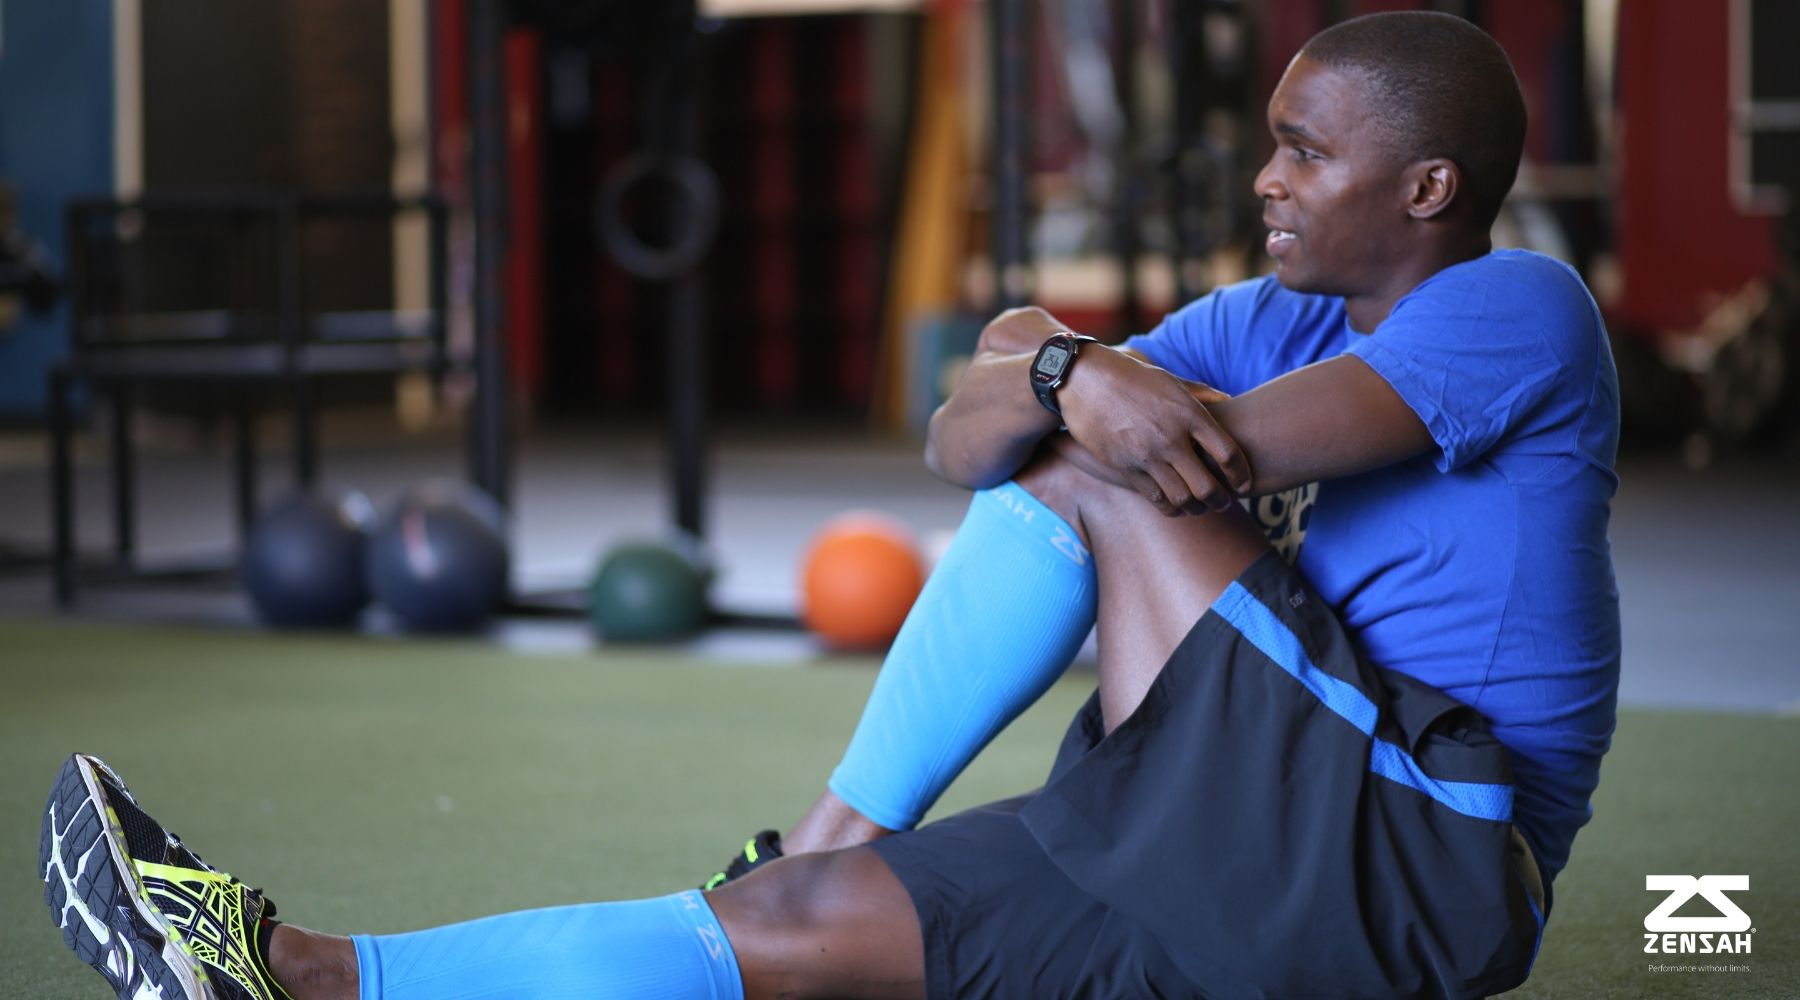 Zensah athlete wearing compression leg sleeves and stretching